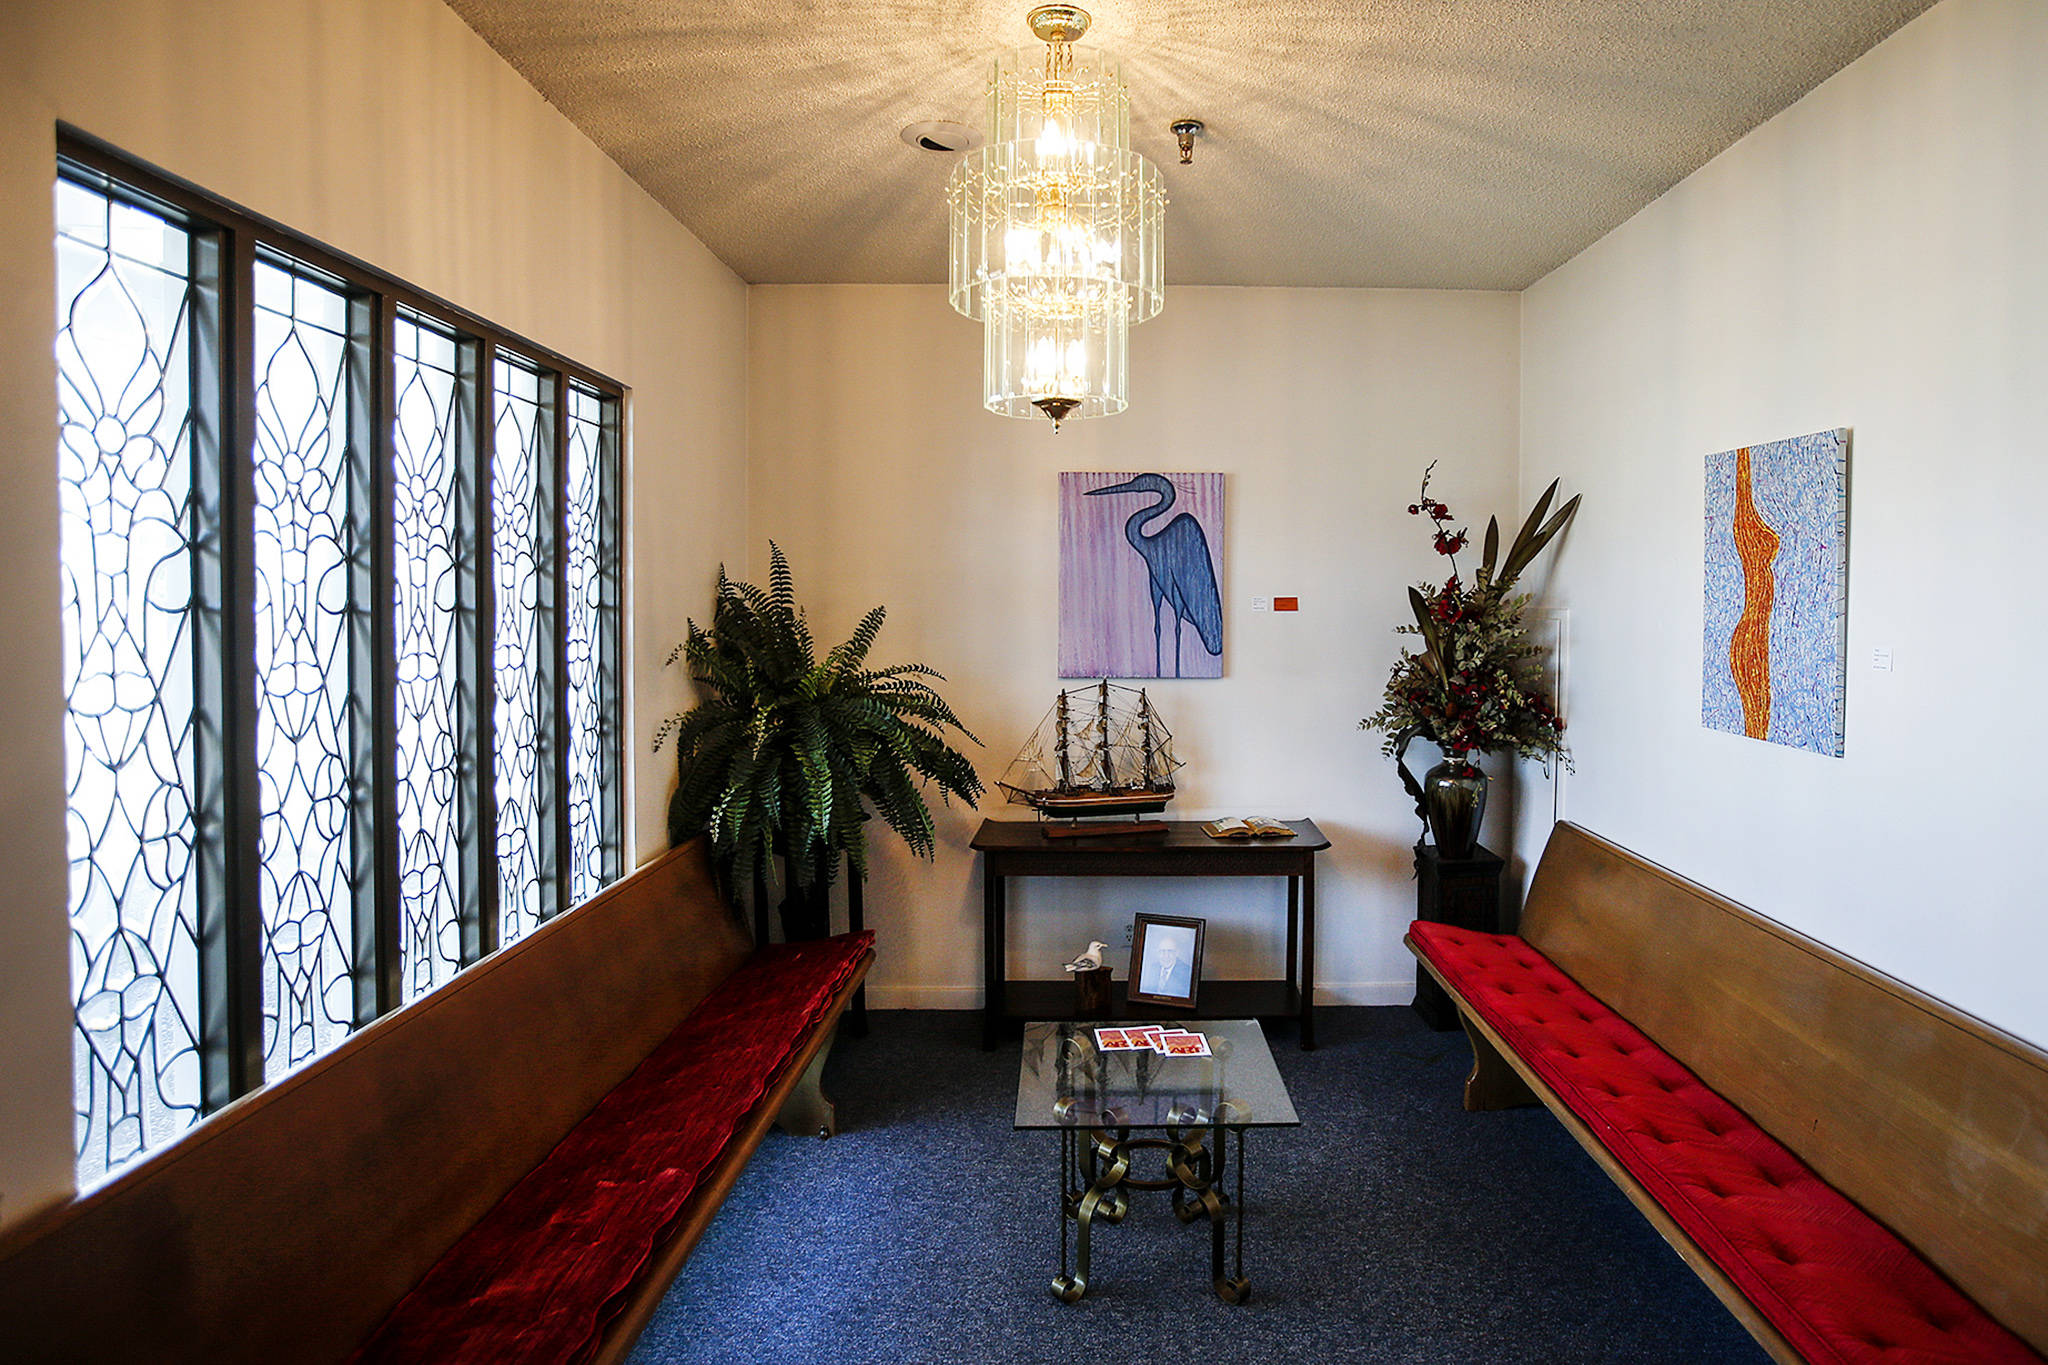 Local artwork adorns the walls of Solie Funeral Home in Everett. (Ian Terry / The Herald)